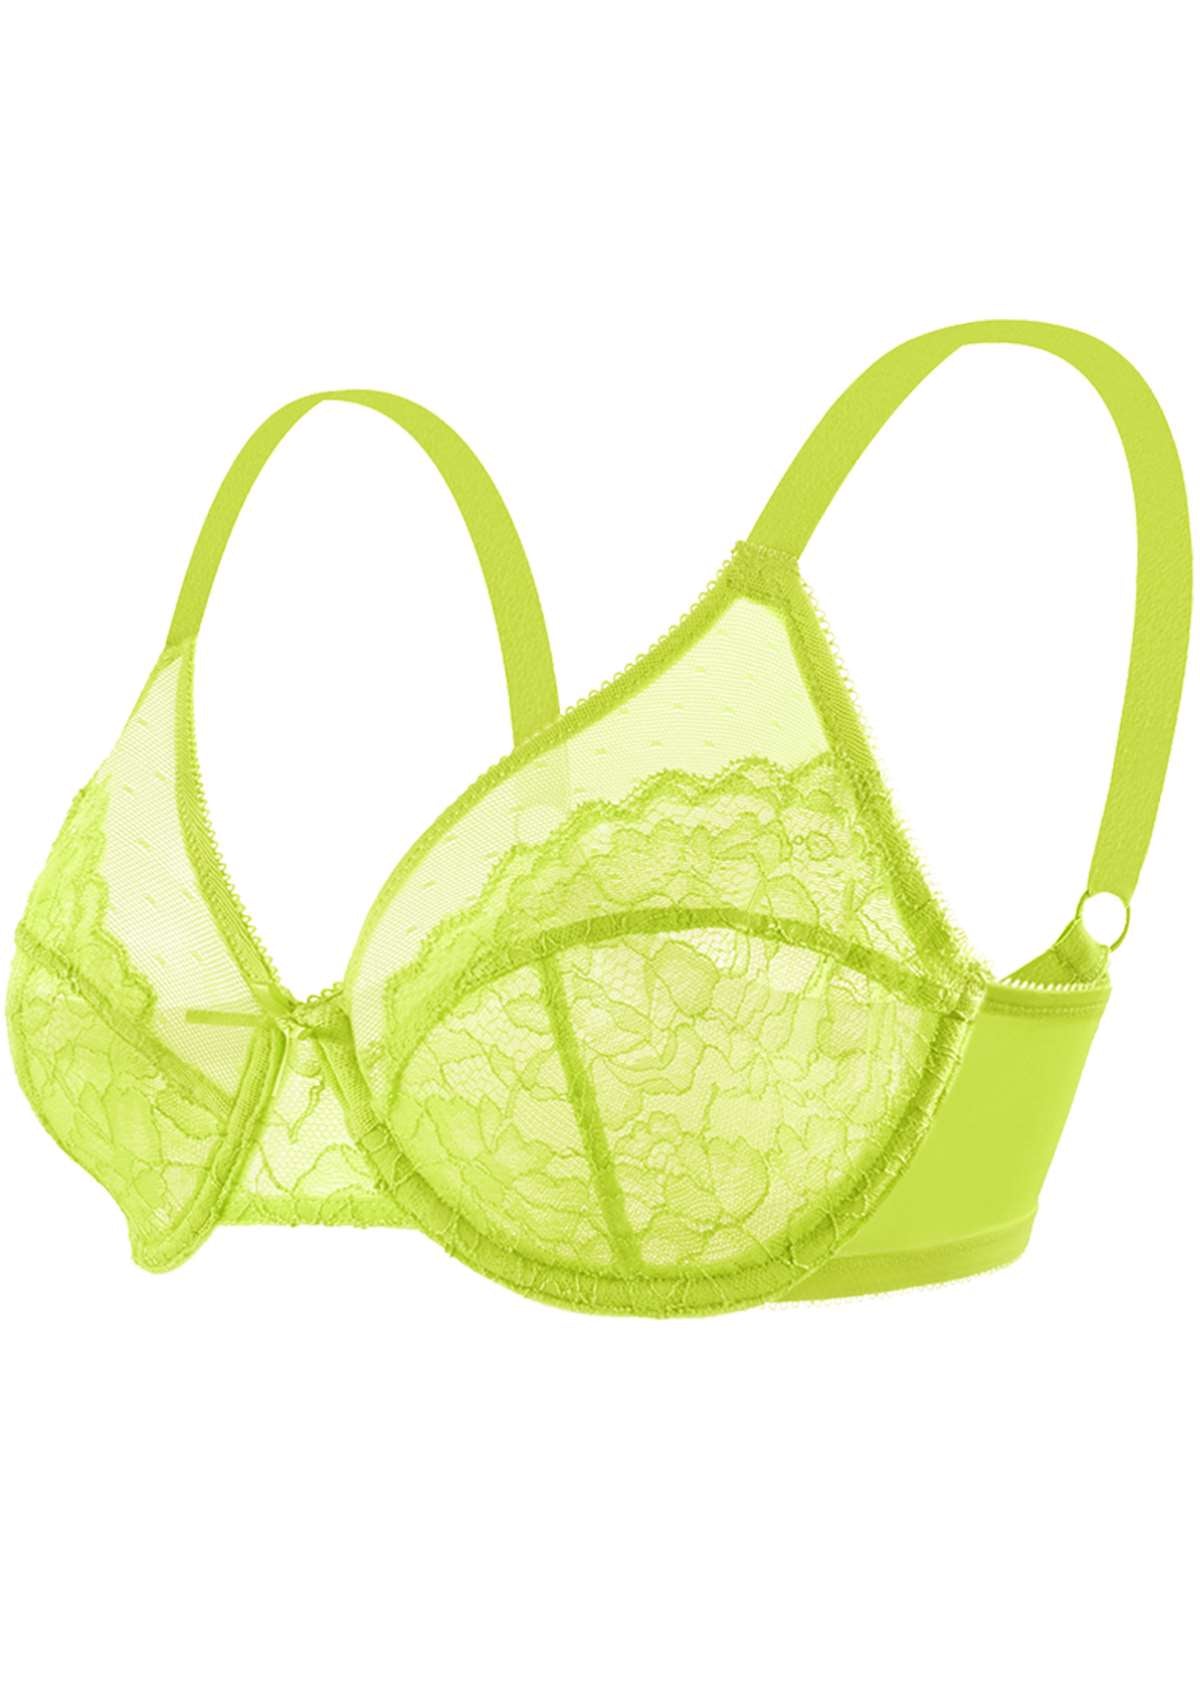 HSIA Enchante Full Cup Minimizing Bra: Supportive Unlined Lace Bra - Lime Green / 38 / I